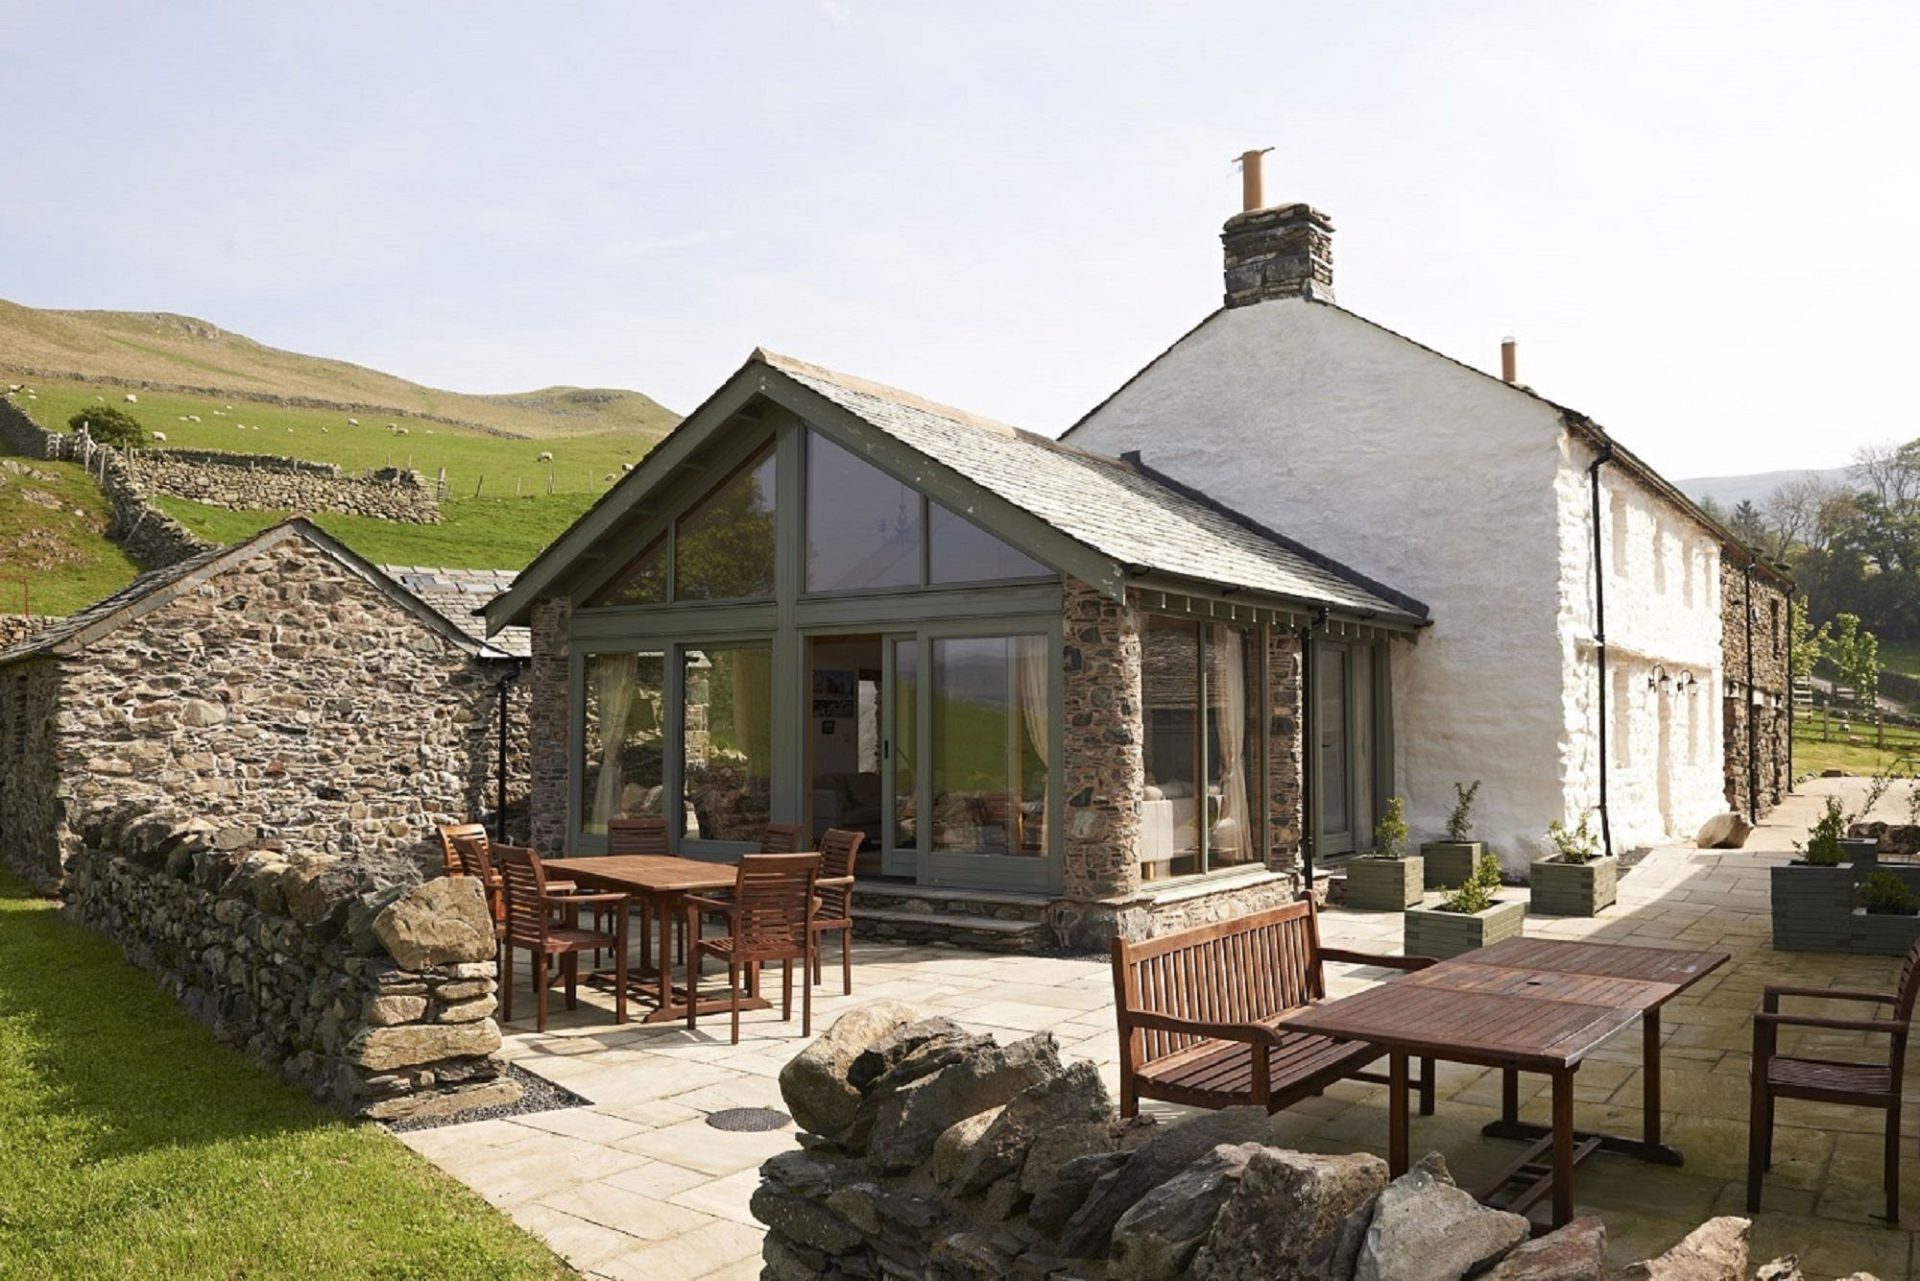 Hause Hall Farm sandstone terrace at luxury holiday cottage in Lake District National Park at The Rowley Estates